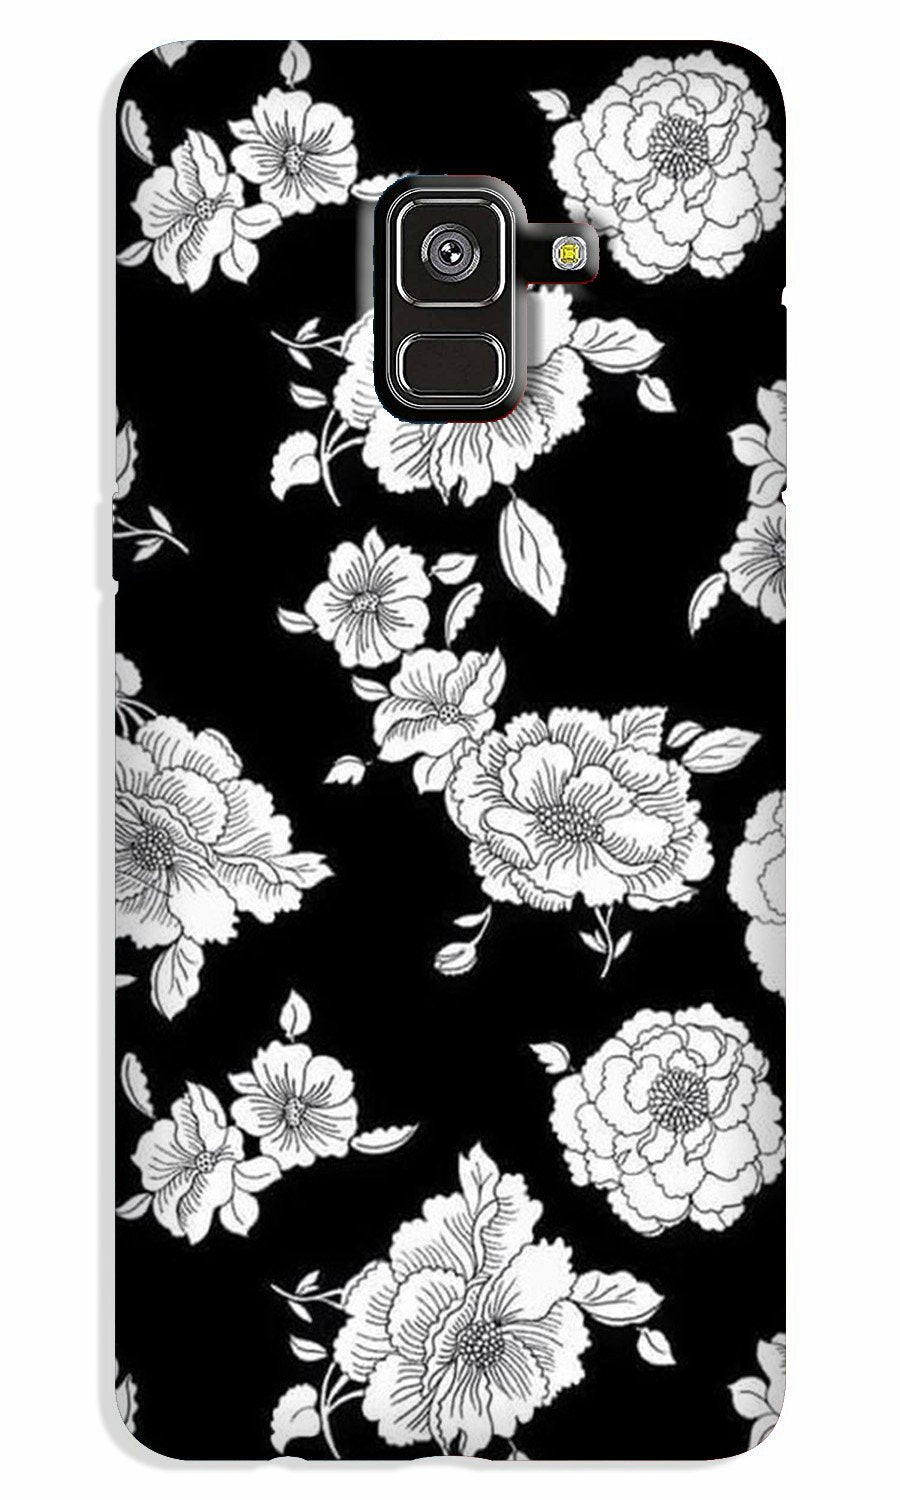 White flowers Black Background Case for Galaxy J6 / On6